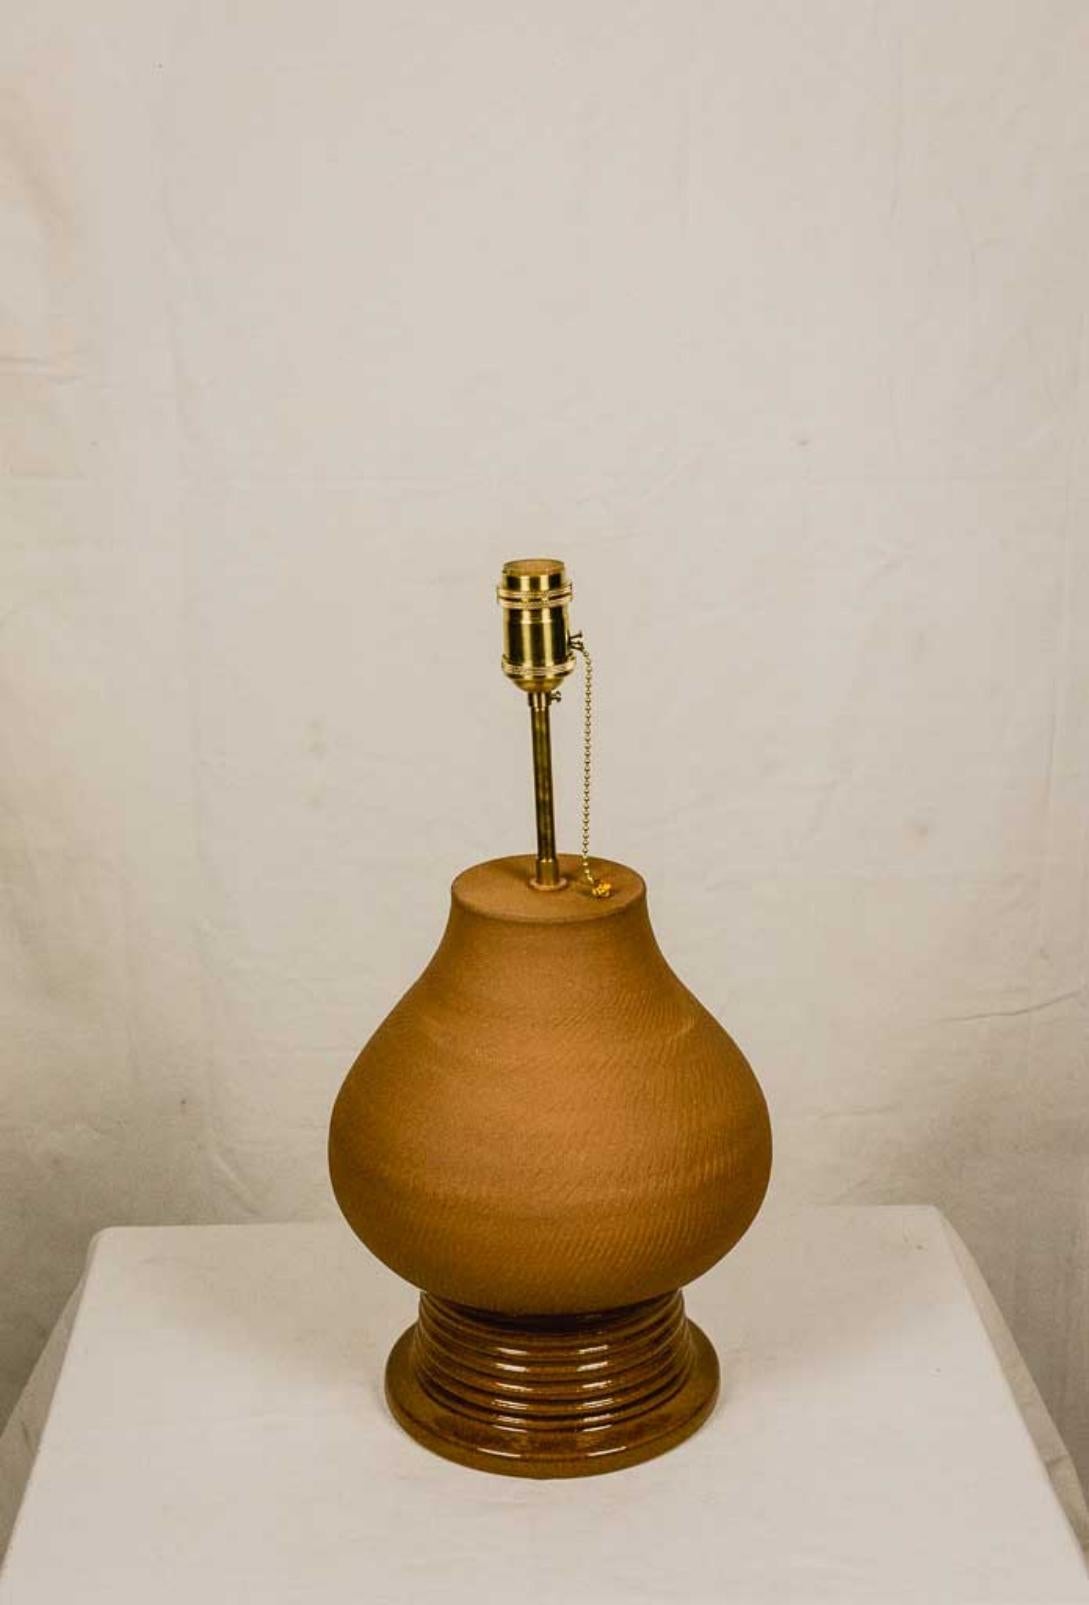 Table lamp inspired by the ancient amphora, which appears for the first time on the coasts of Lebanon and Syria, during the fifteenth century BC. C. and spread throughout the ancient world as easy to transport containers. The lamp is made of clay